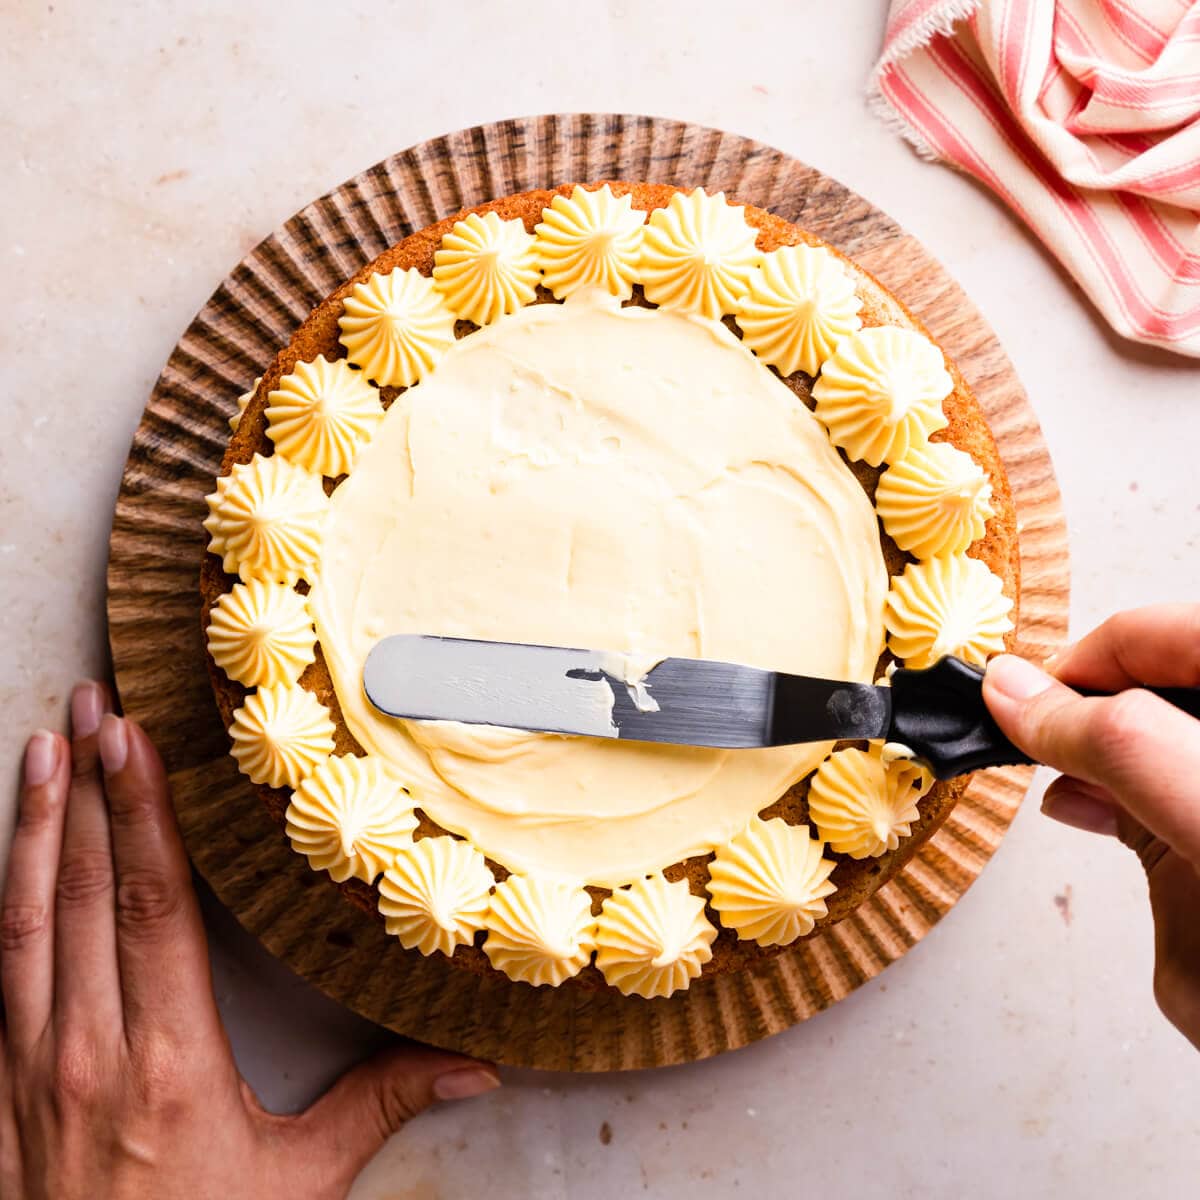 custard buttercream being spread with an offset spatula on top of the sponge cake.